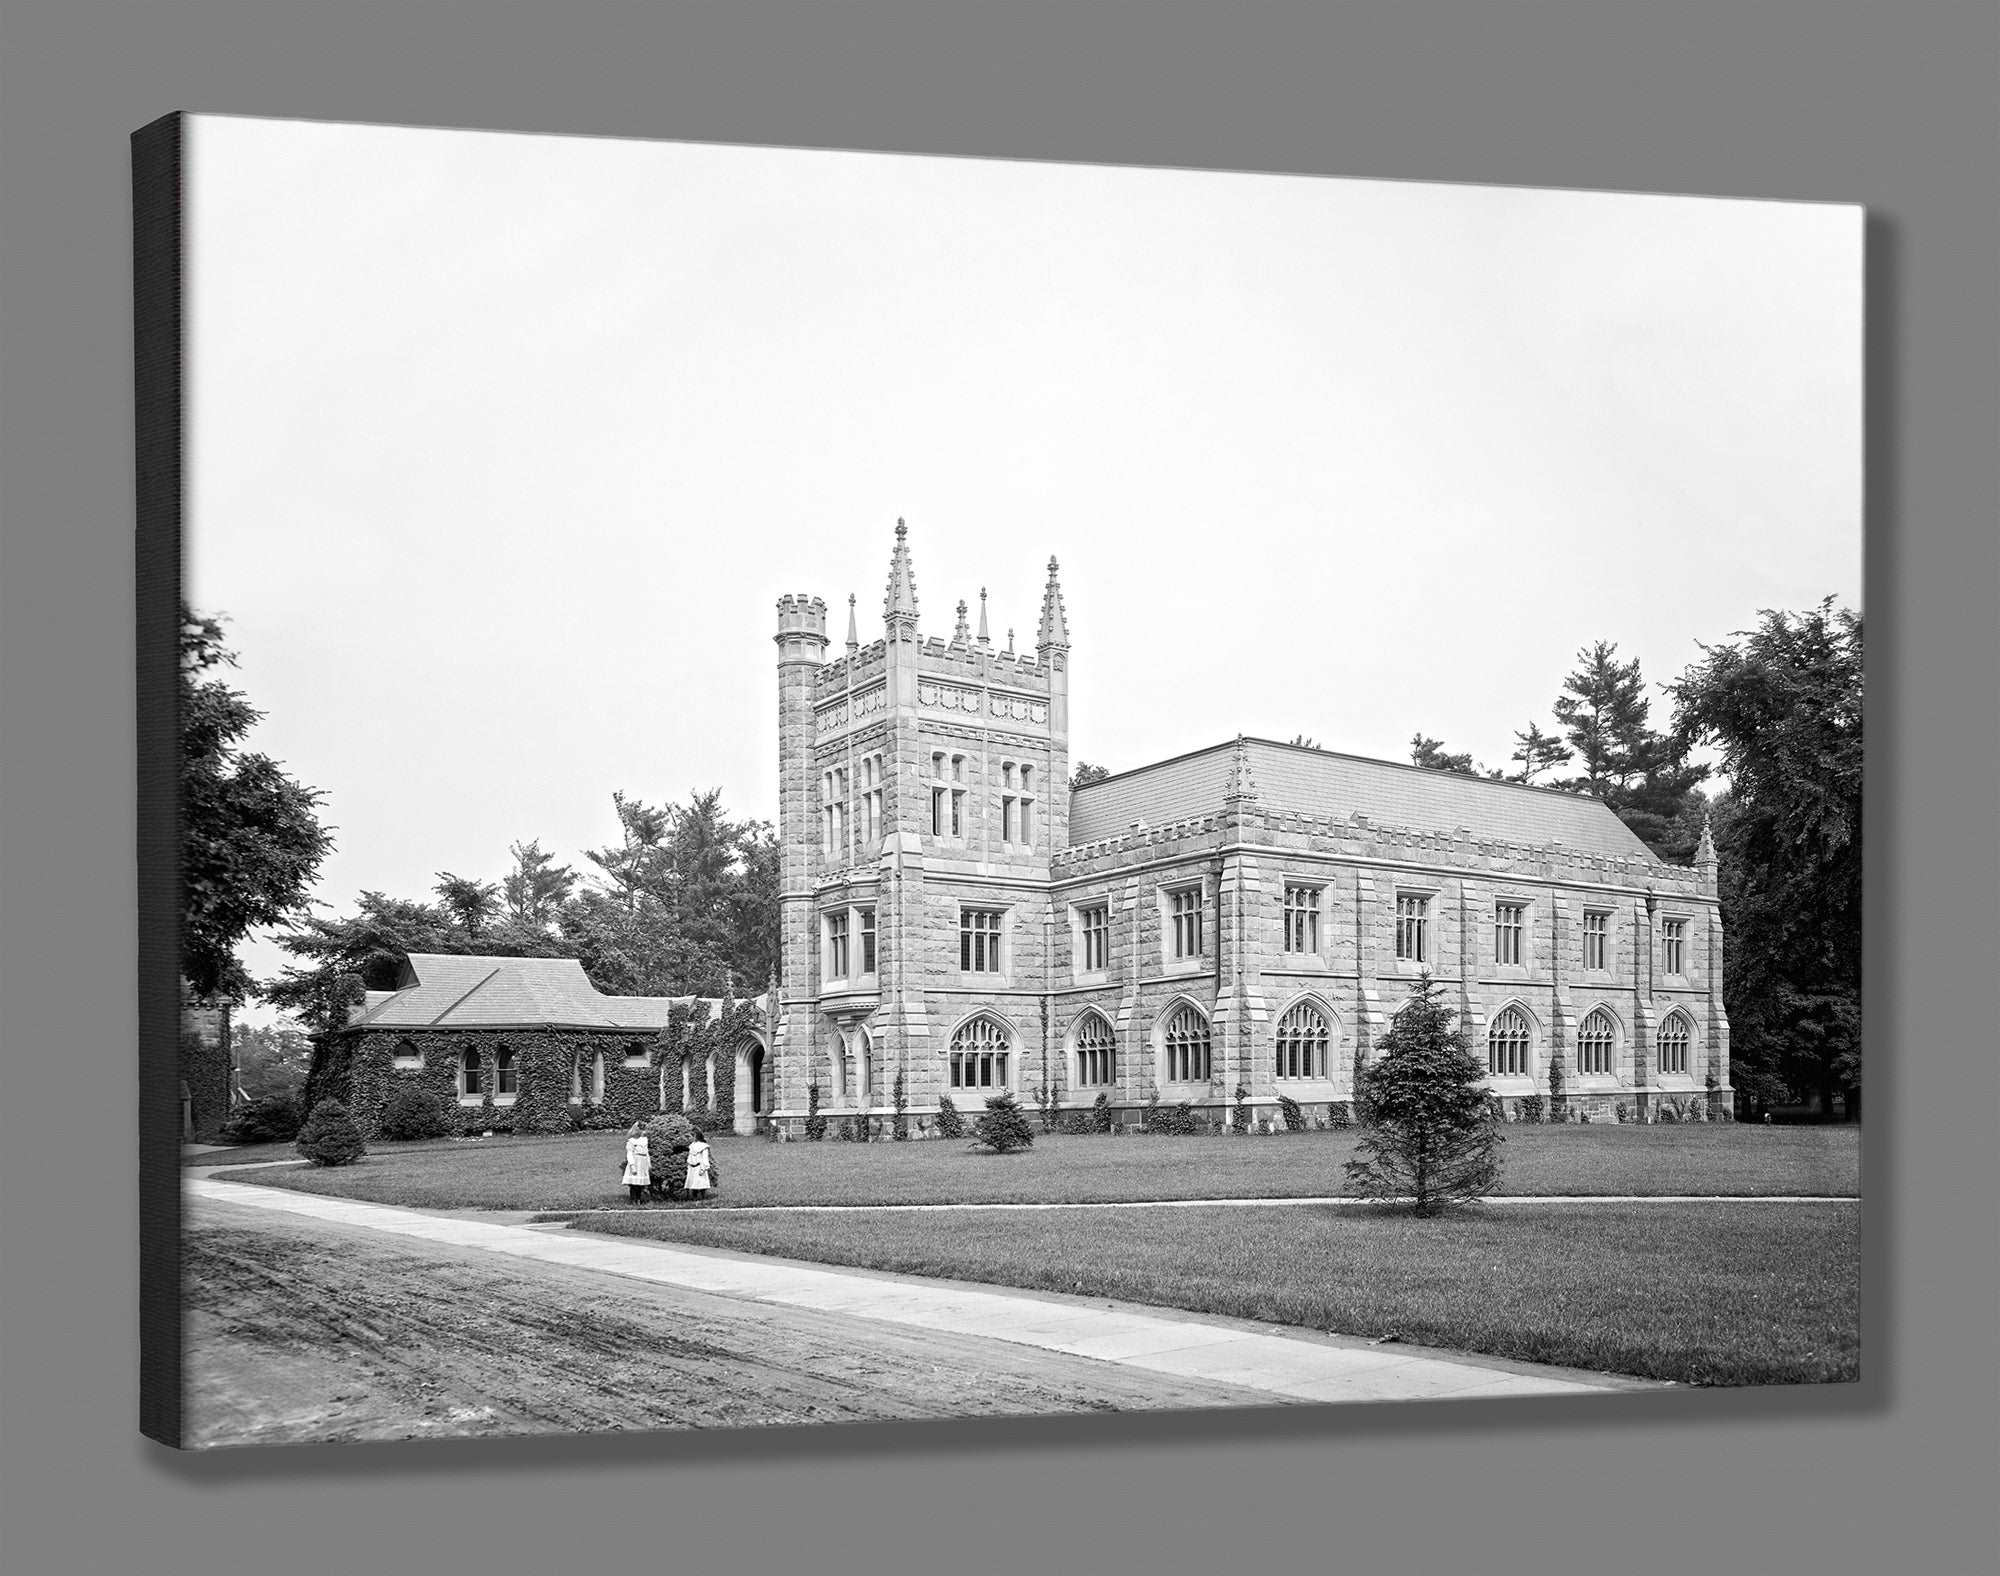 A canvas reproduction print of a vintage photograph of Murray Dodge Hall